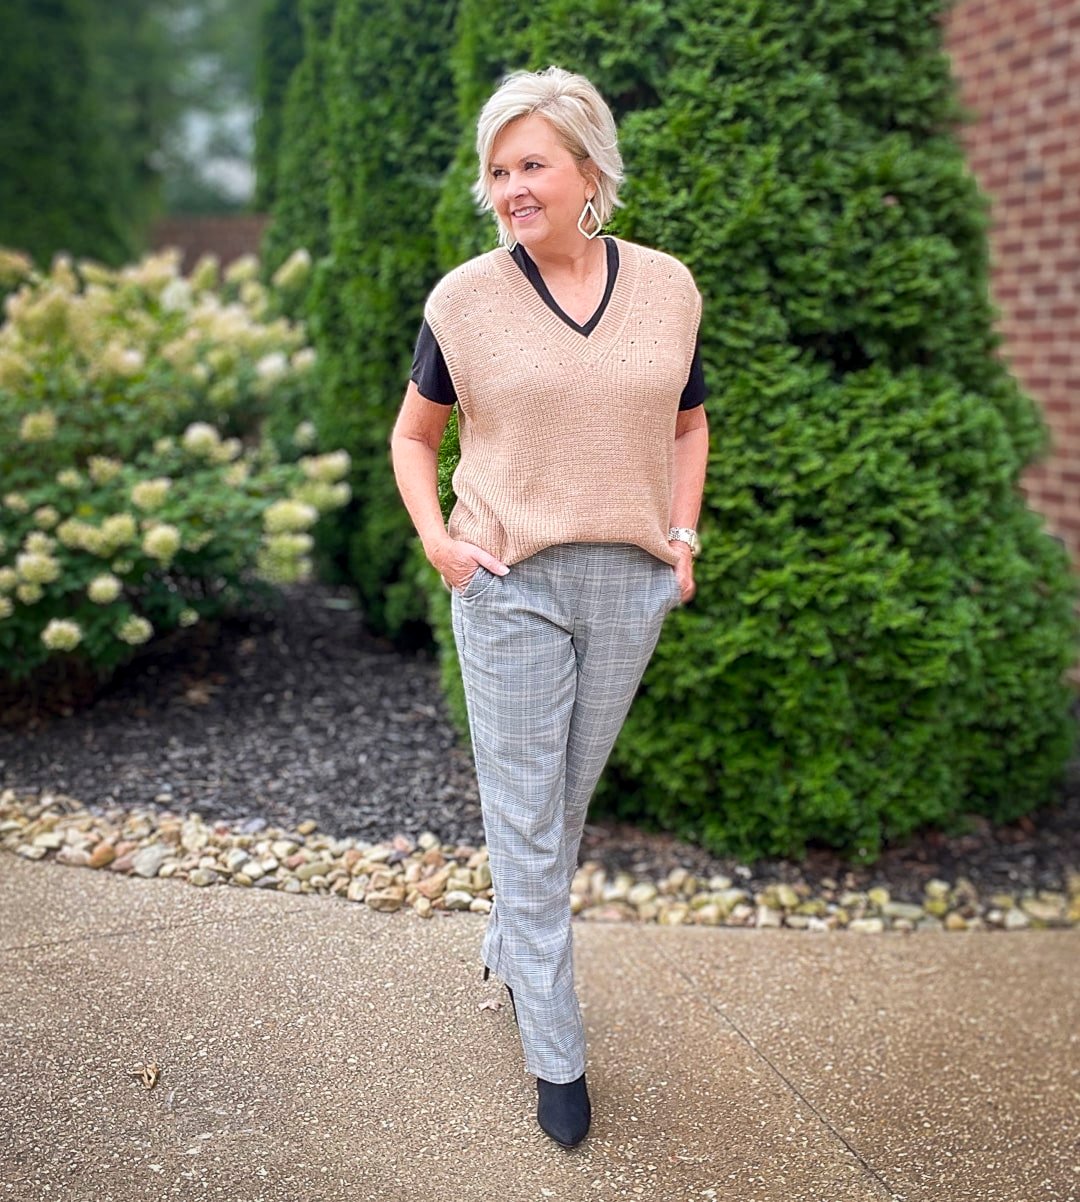 Over 40 Fashion Blogger, Tania Stephens is wearing a tan vest for fall from Walmart23